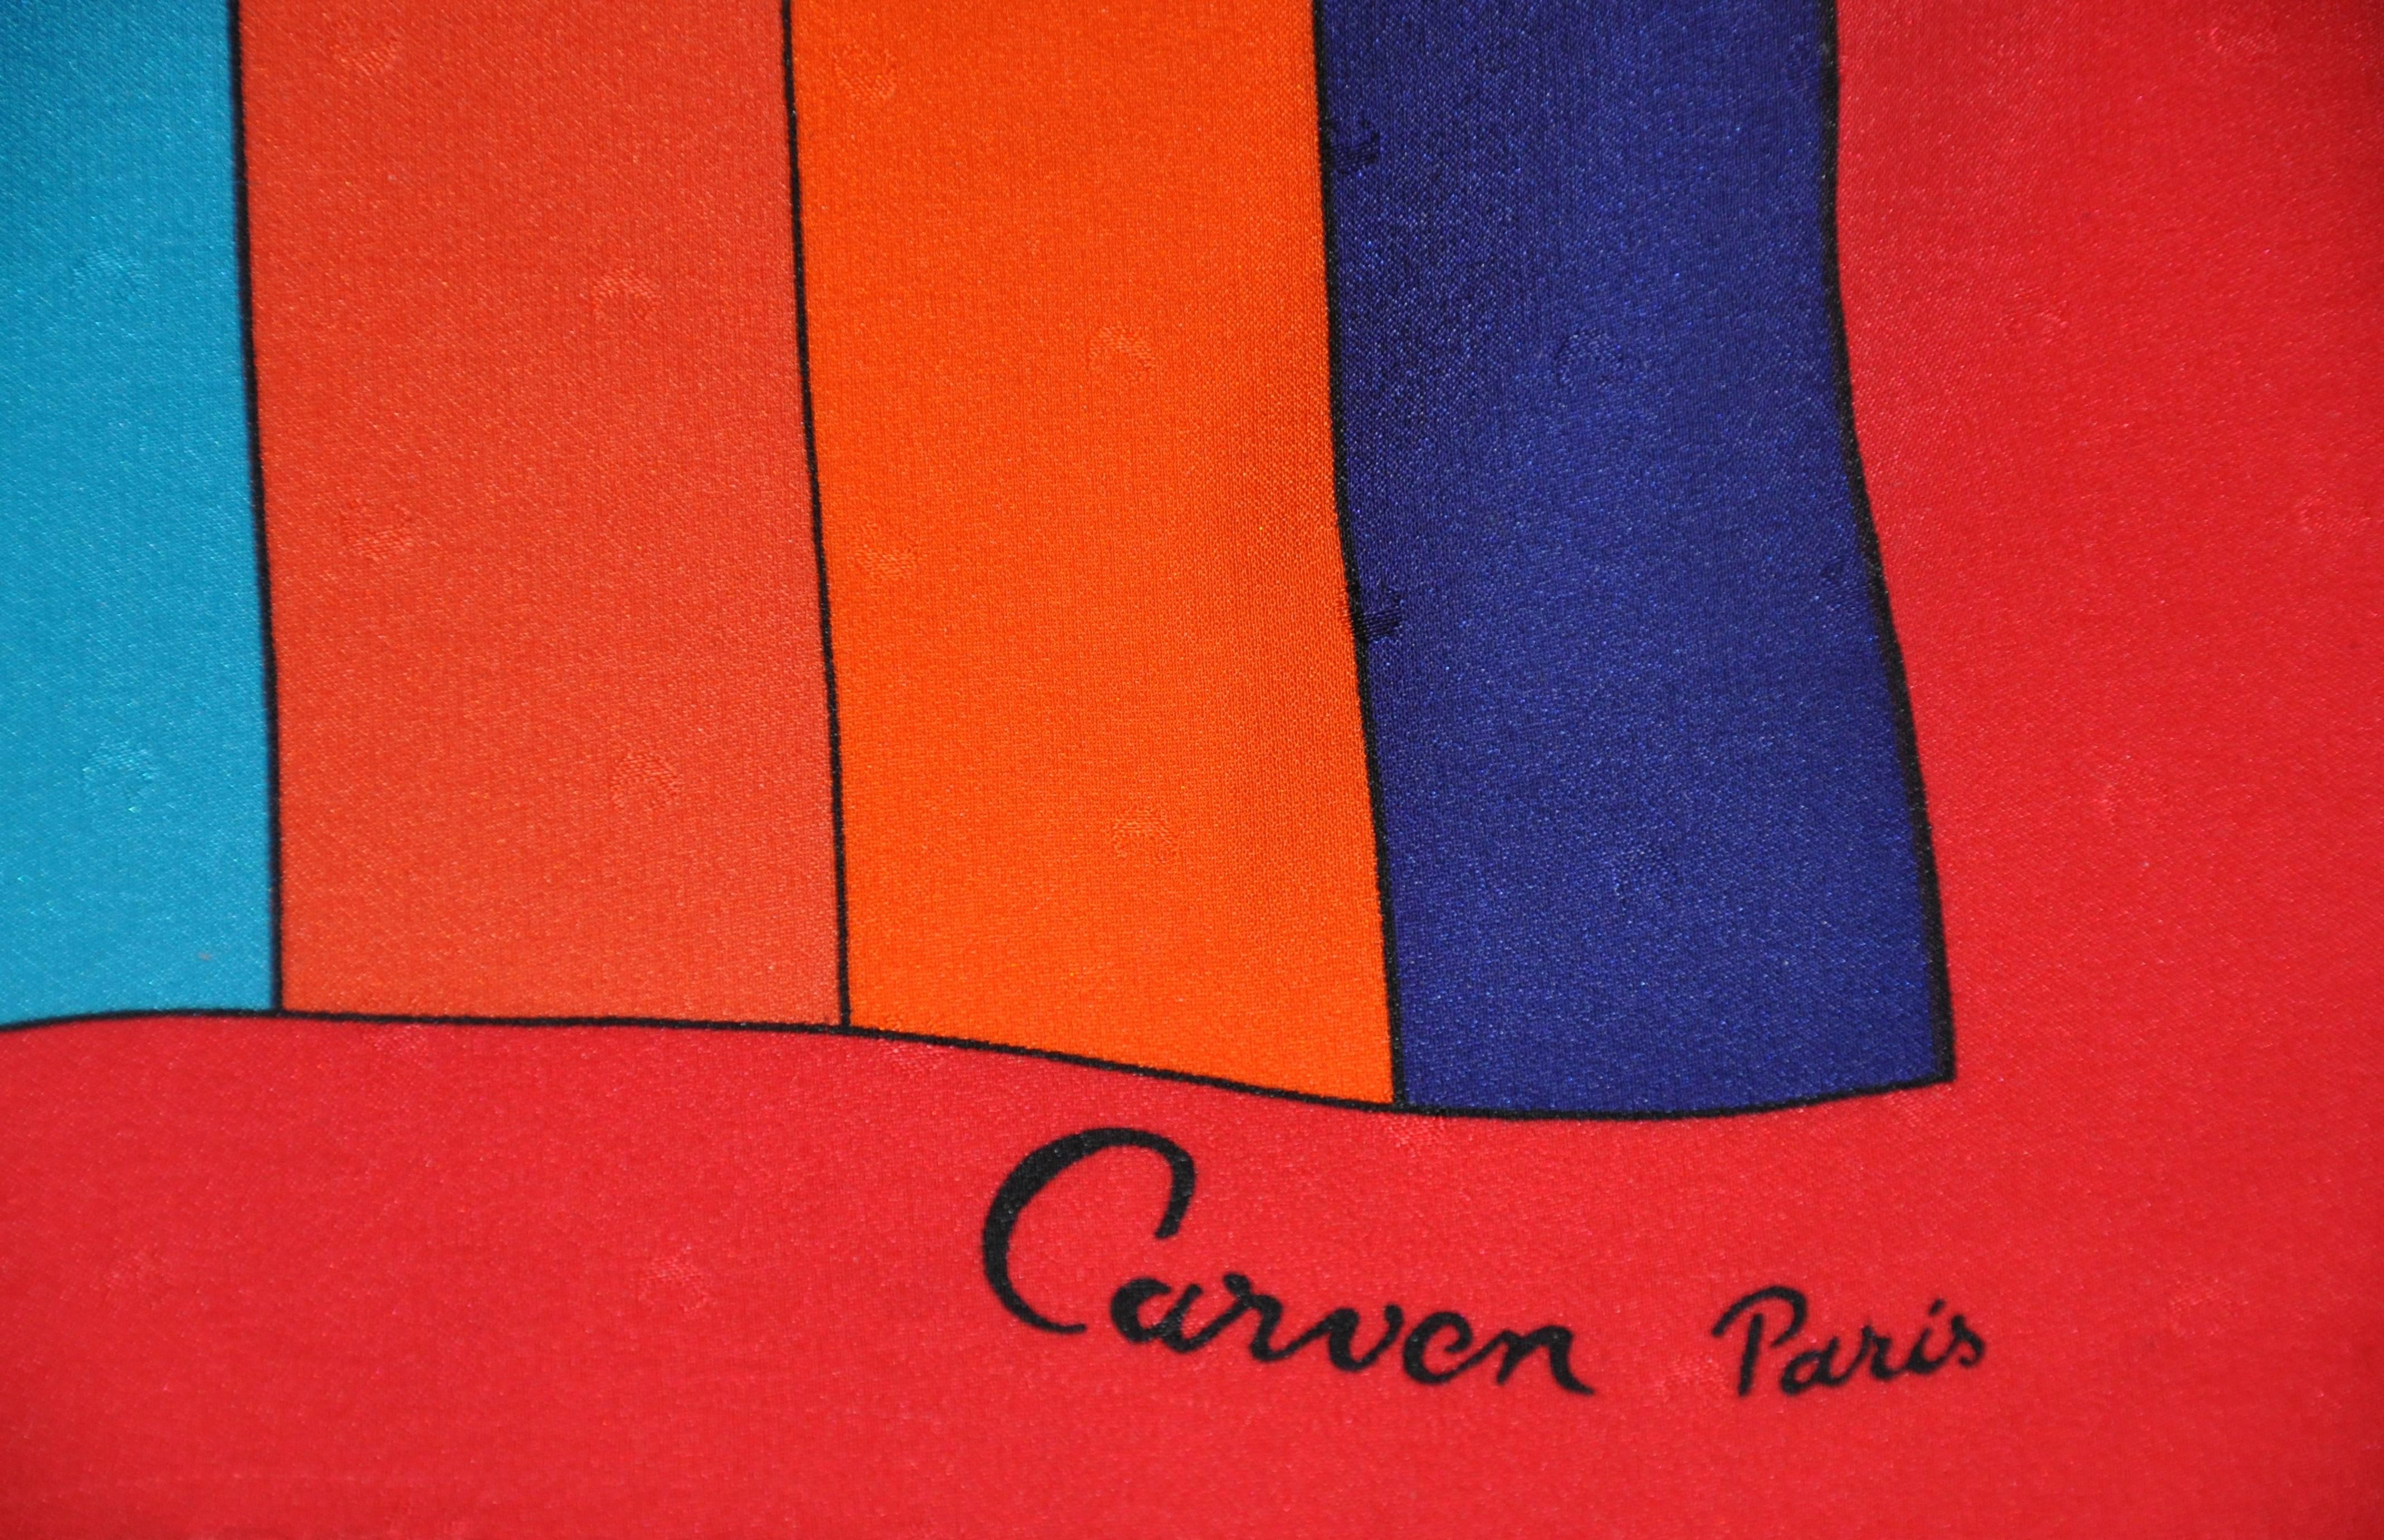       Carven bold multi-colors in silk crepe de chine shows in this wonderful color-clock print. The scarf measures 34